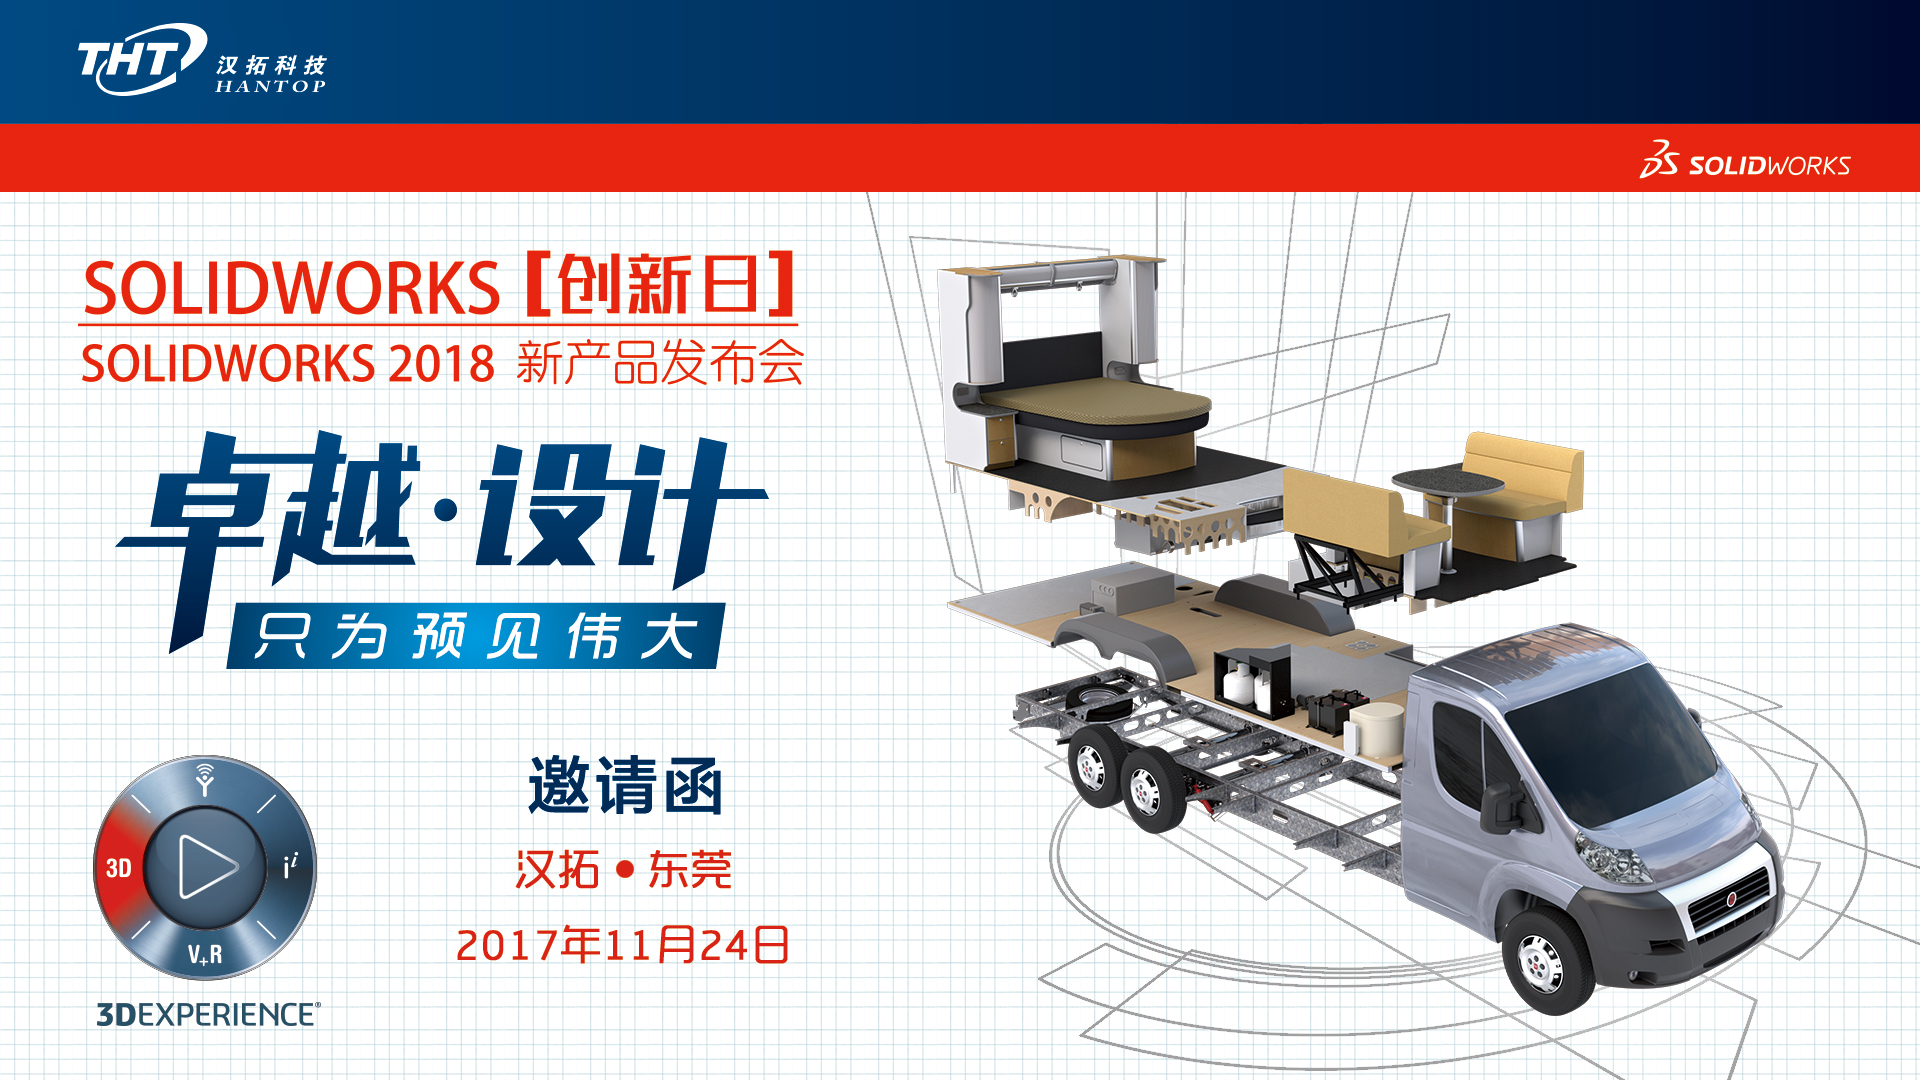 SOLIDWORKS2018新品功能体验 -- 东莞